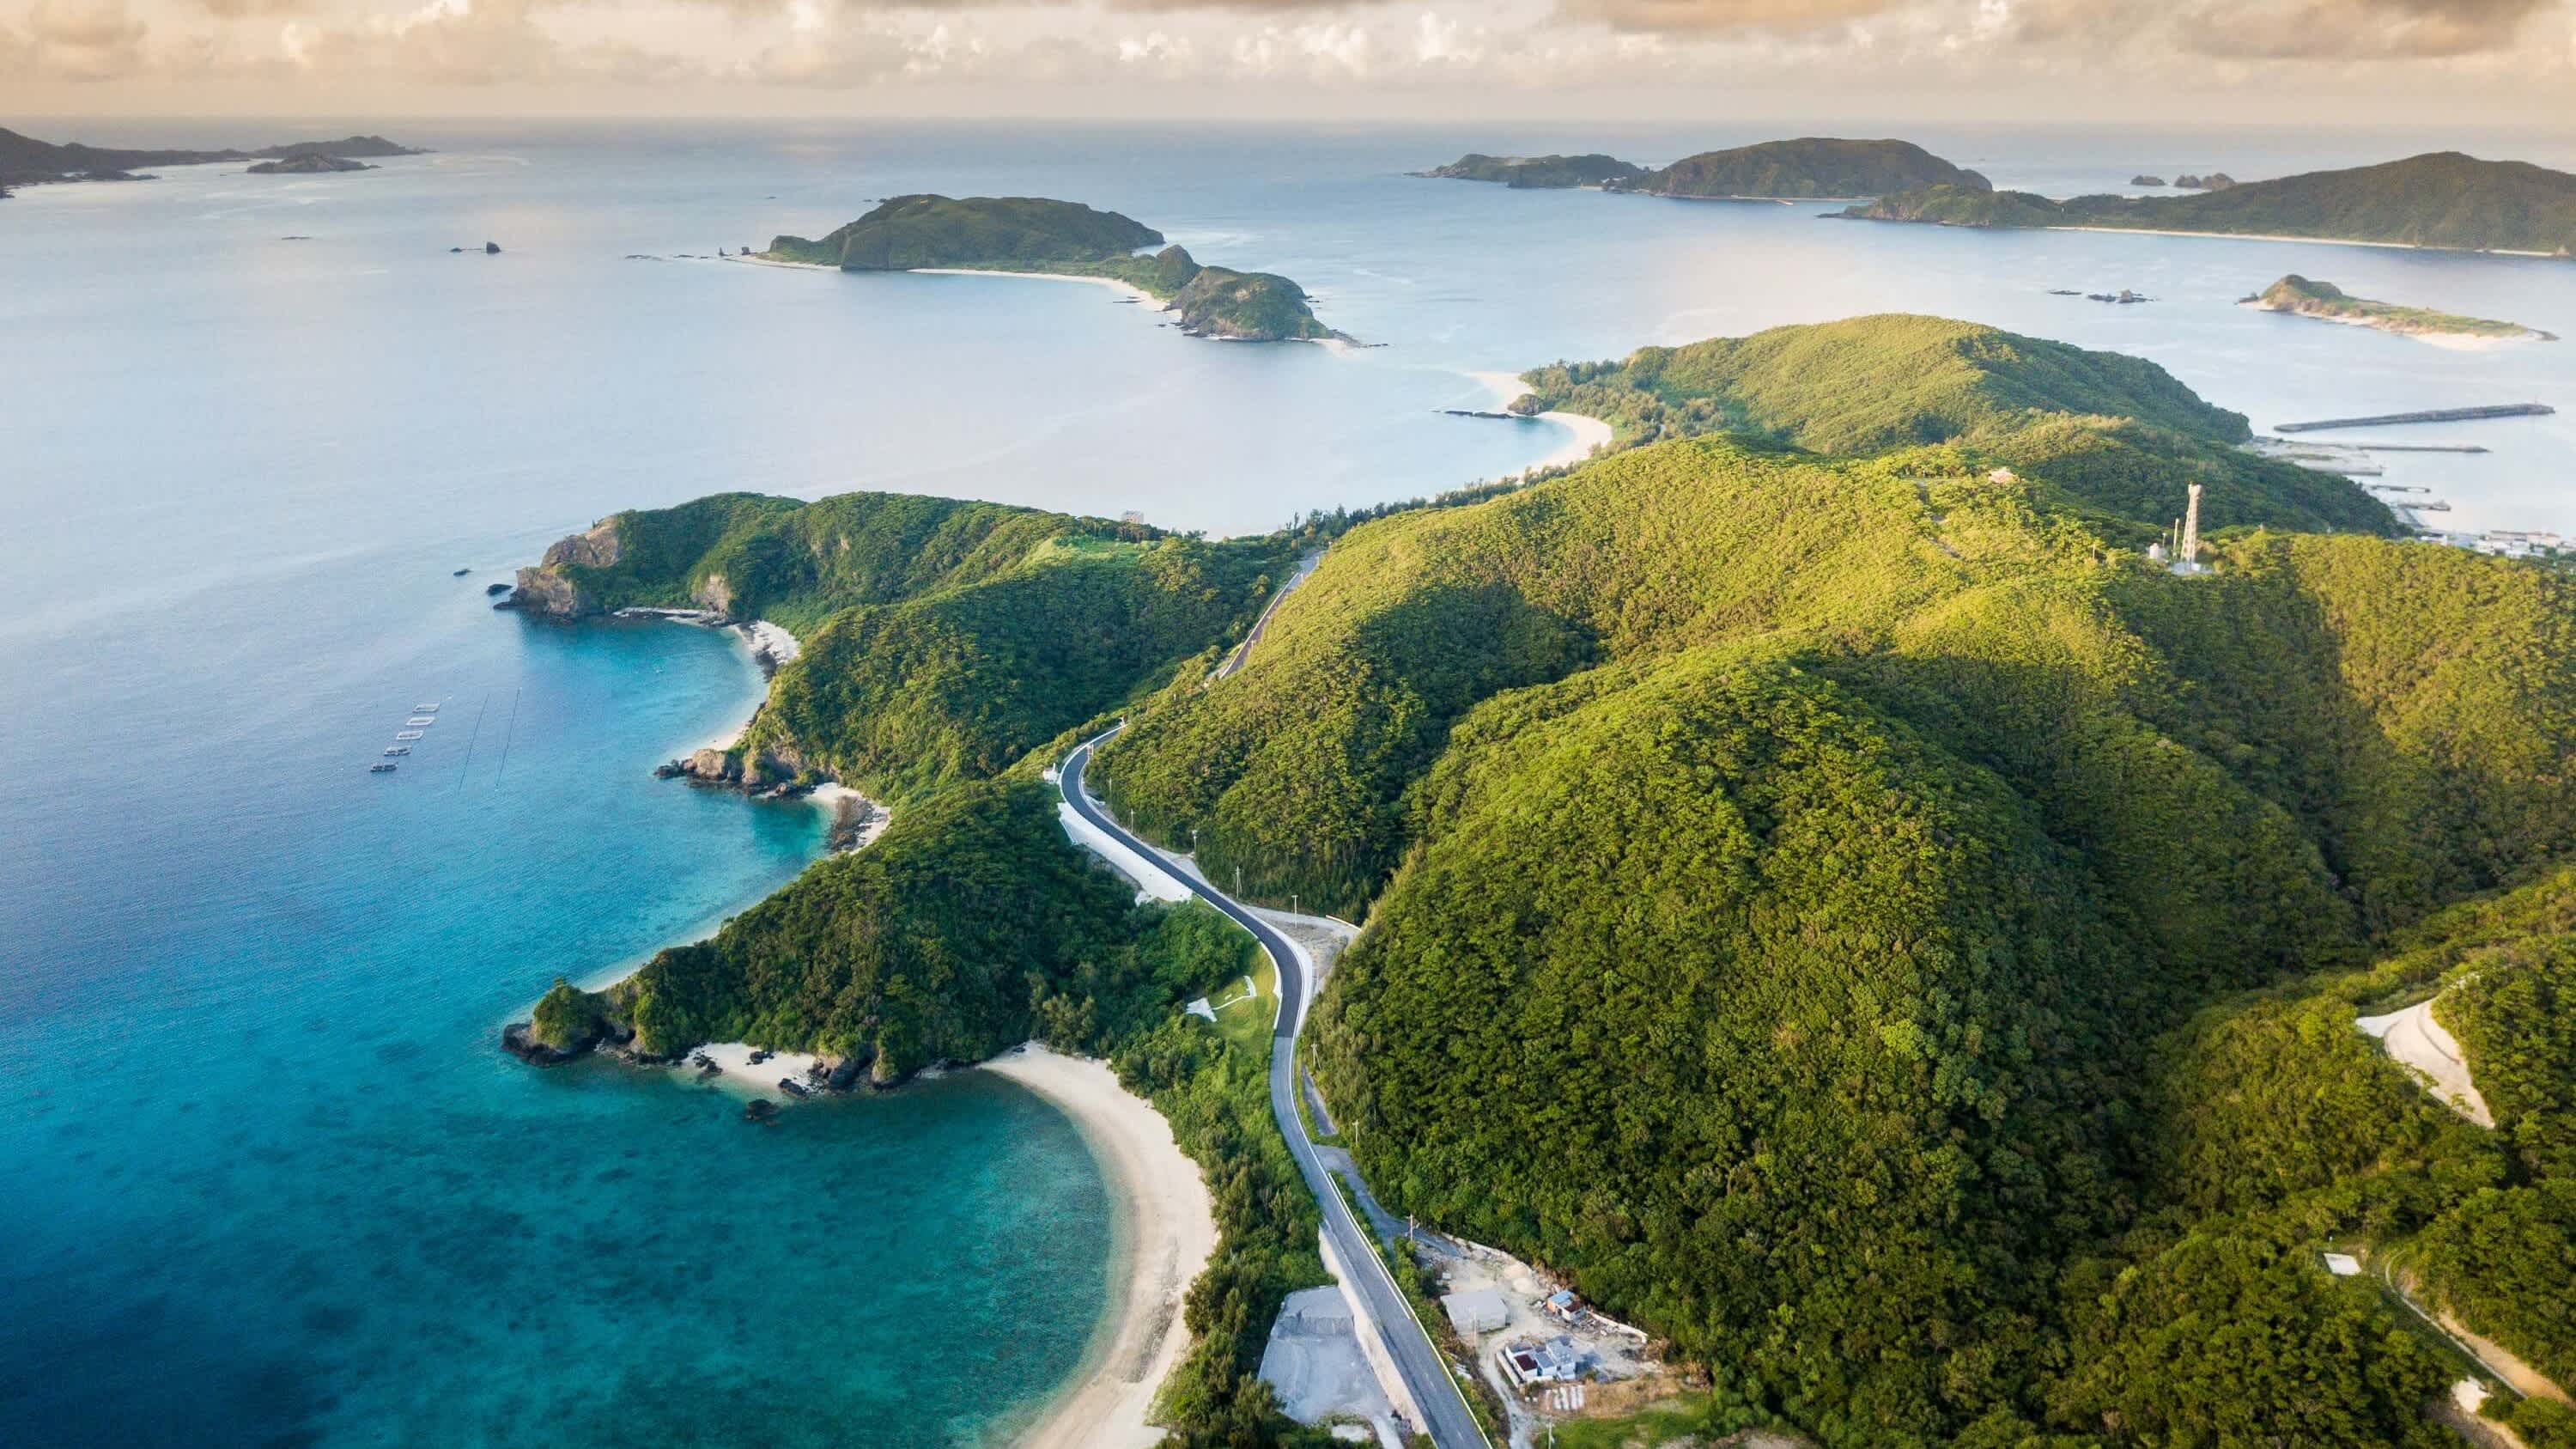 An aerial view at the Kerama islands chain in Okinawa, Japan.